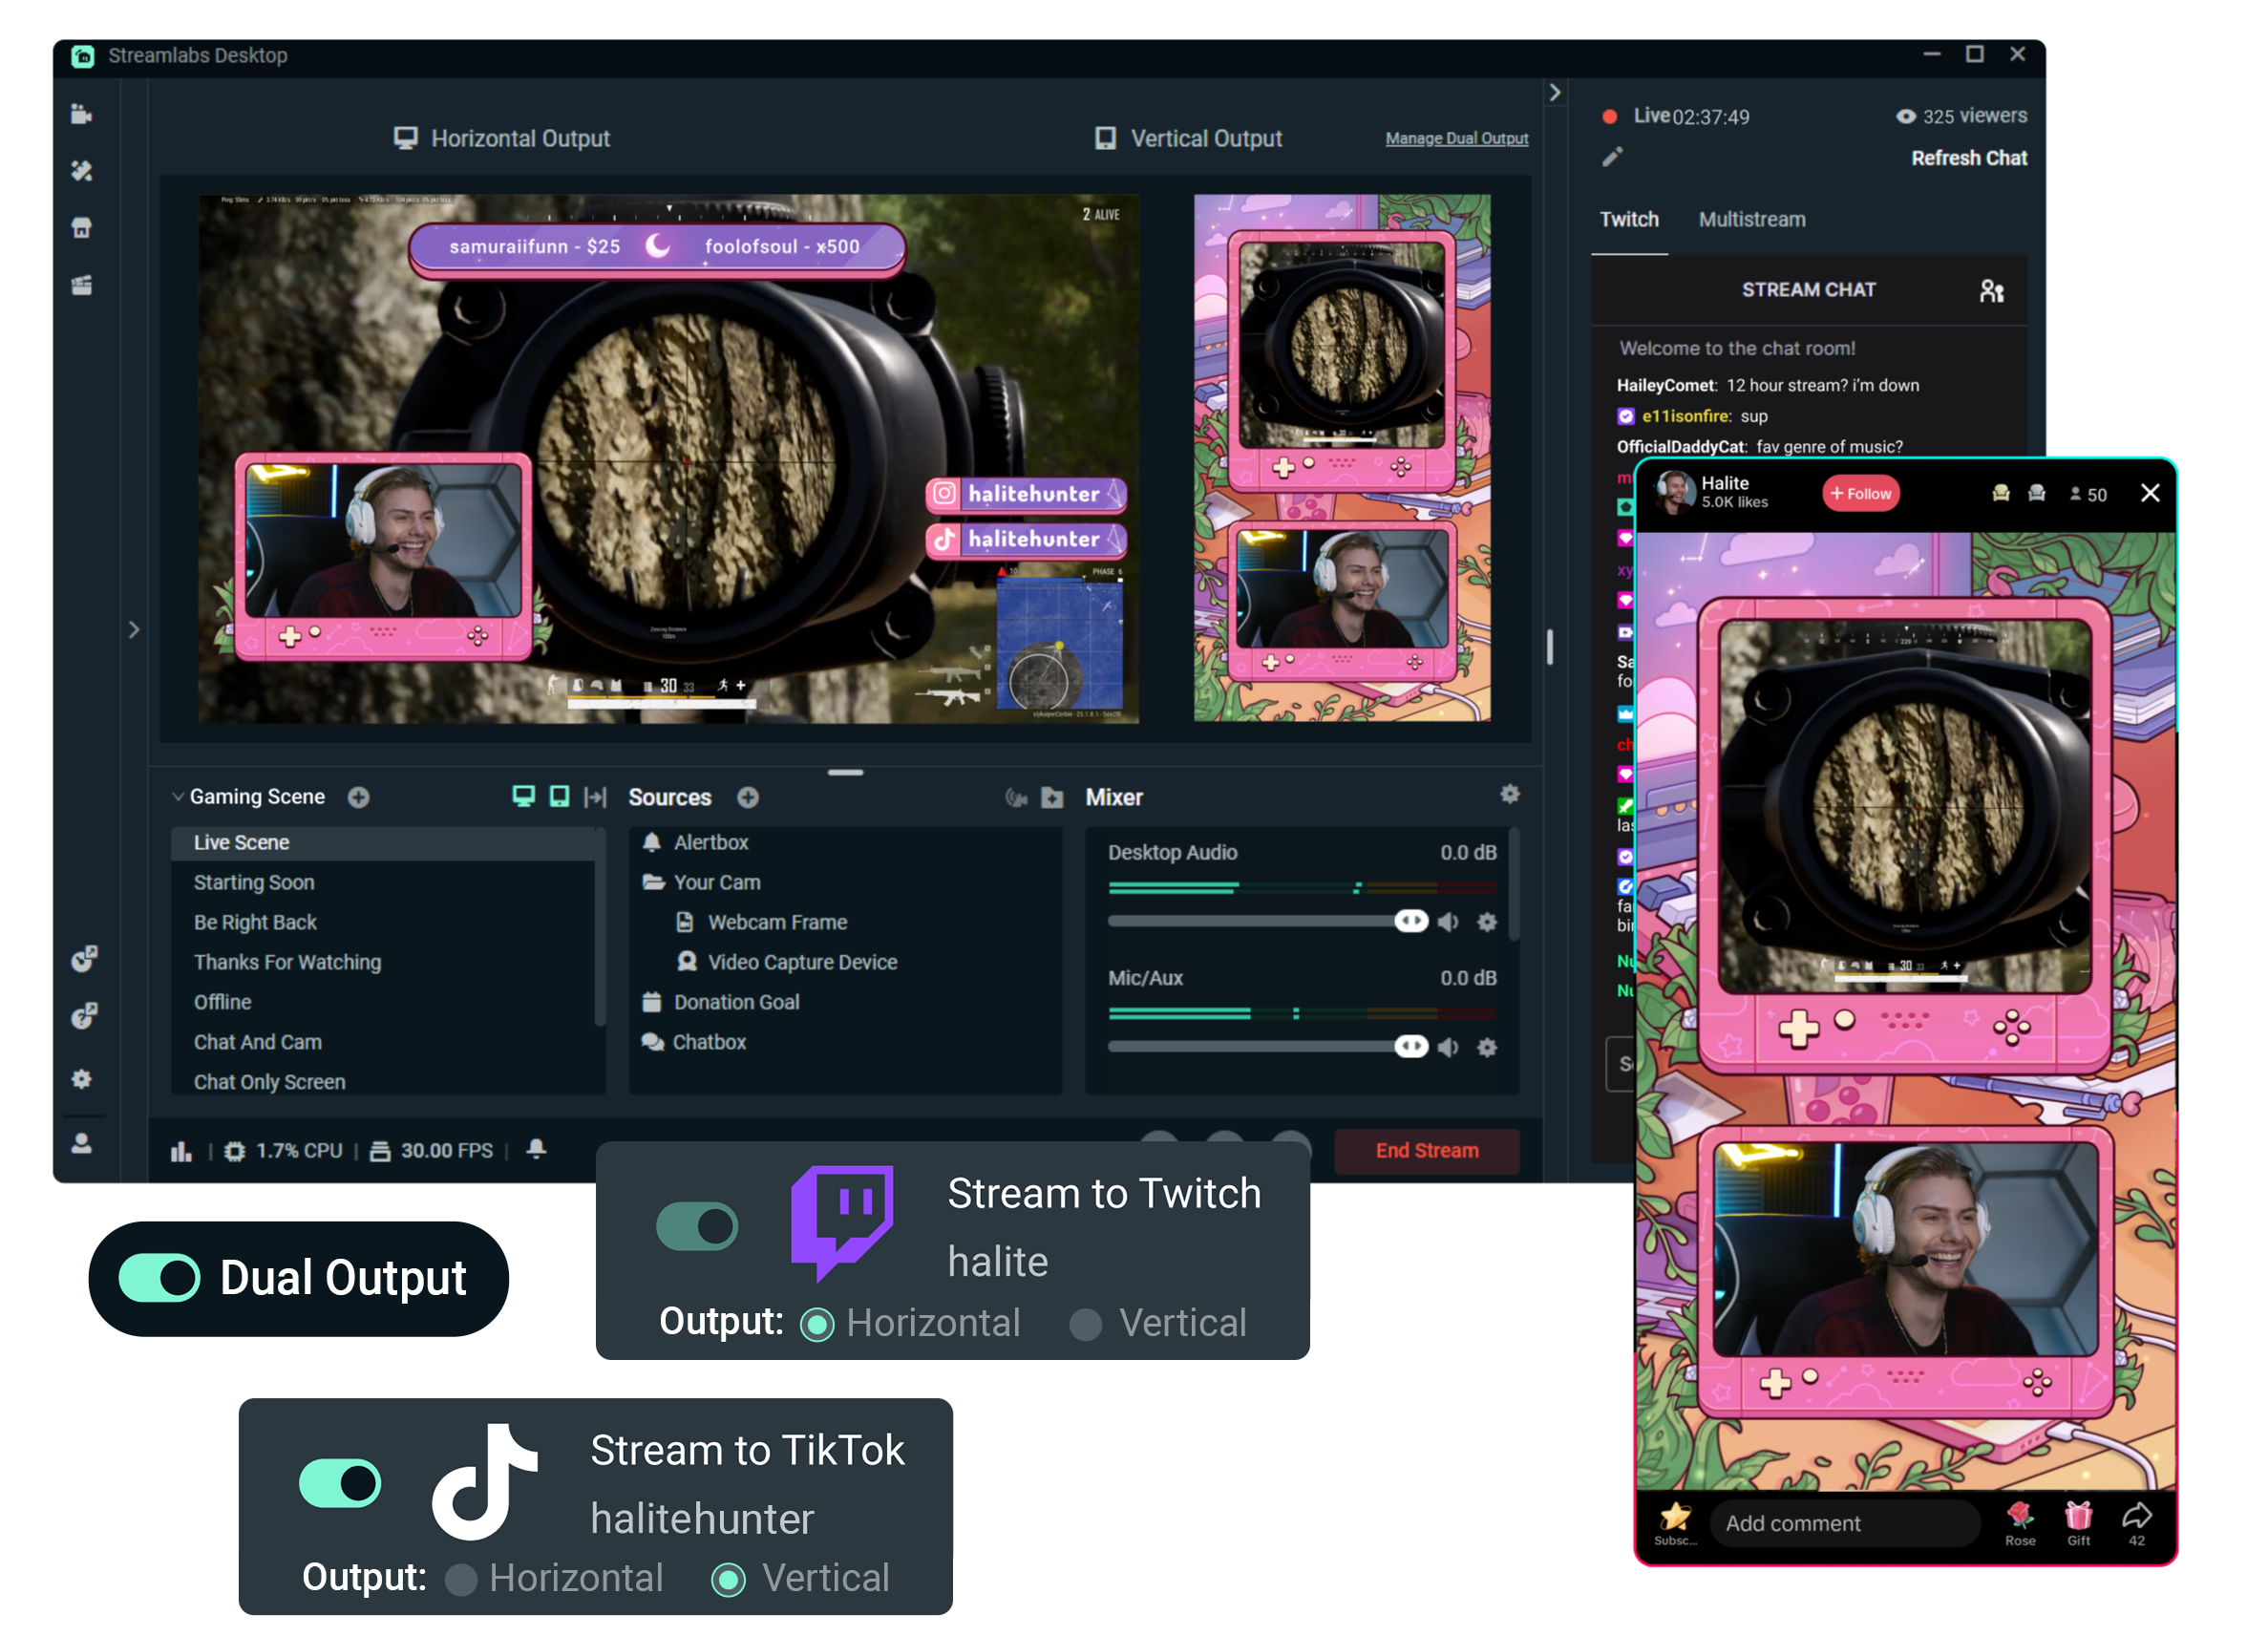 Image of OBS user interface featuring the creator Halite using the Streamlabs Dual Output feature to stream to multiple horizontal and vertical platforms.